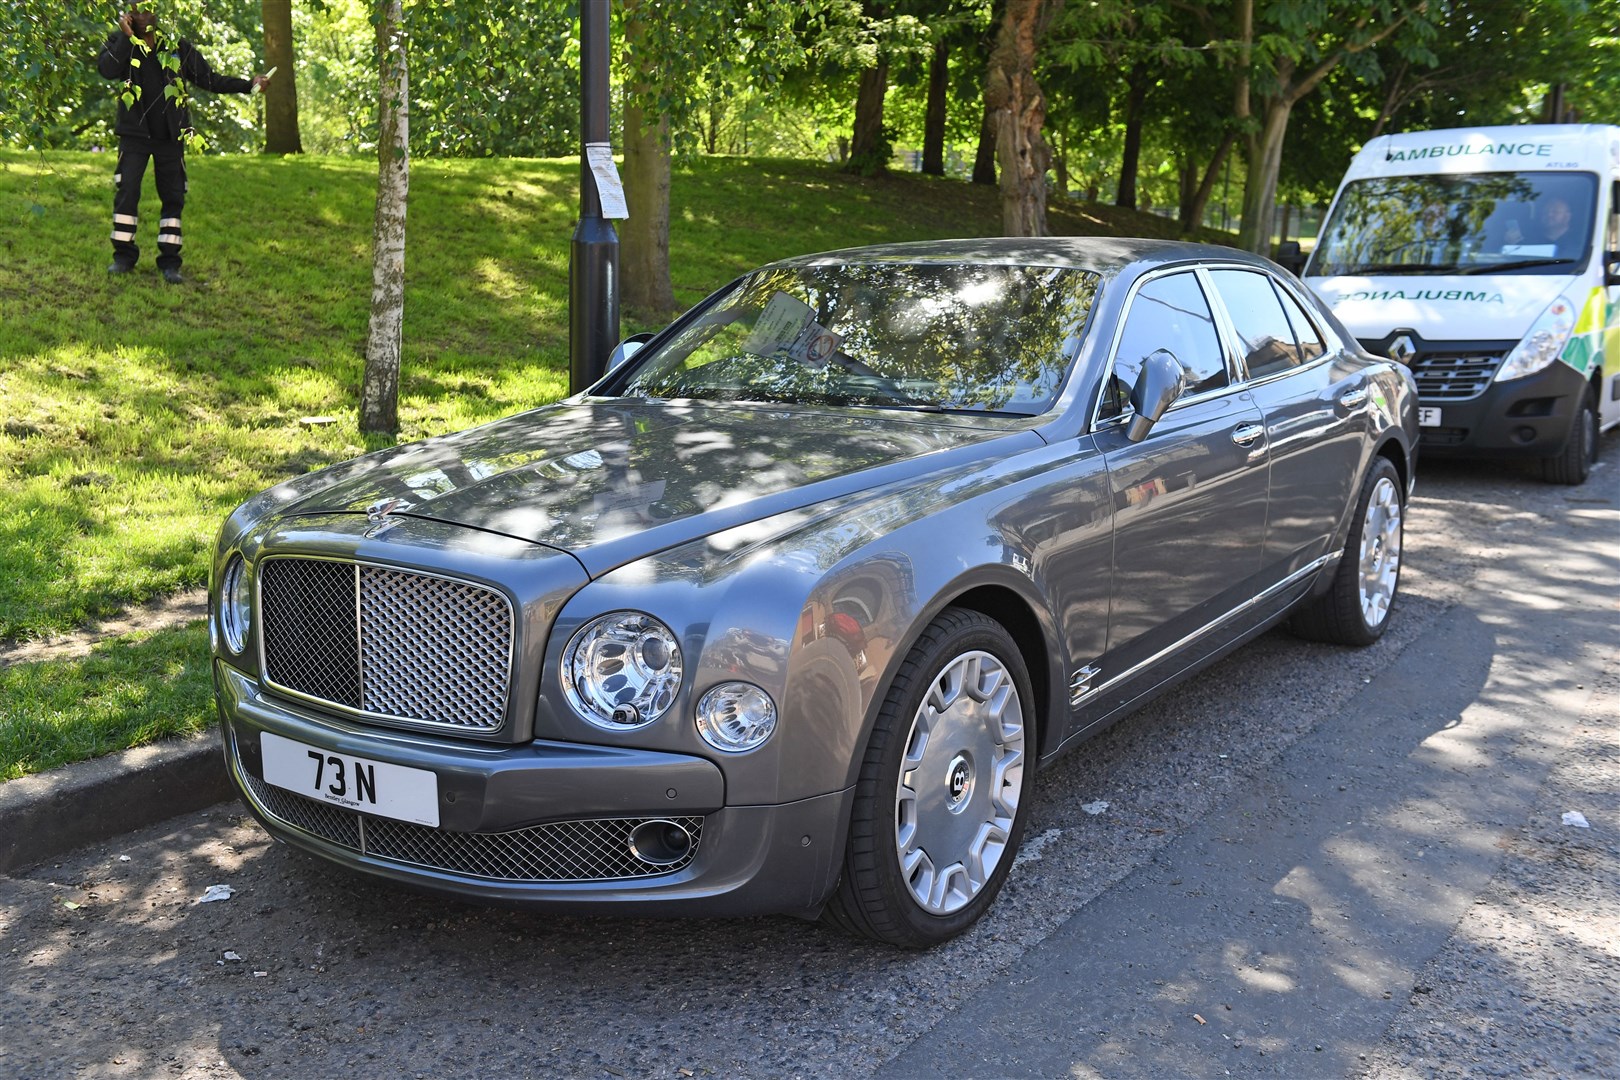 A £100,000 Bentley Mulsanne that belonged to Jonathan Nuttall and which was recovered following the eight-year NCA investigation (Stefan Rousseau/PA)